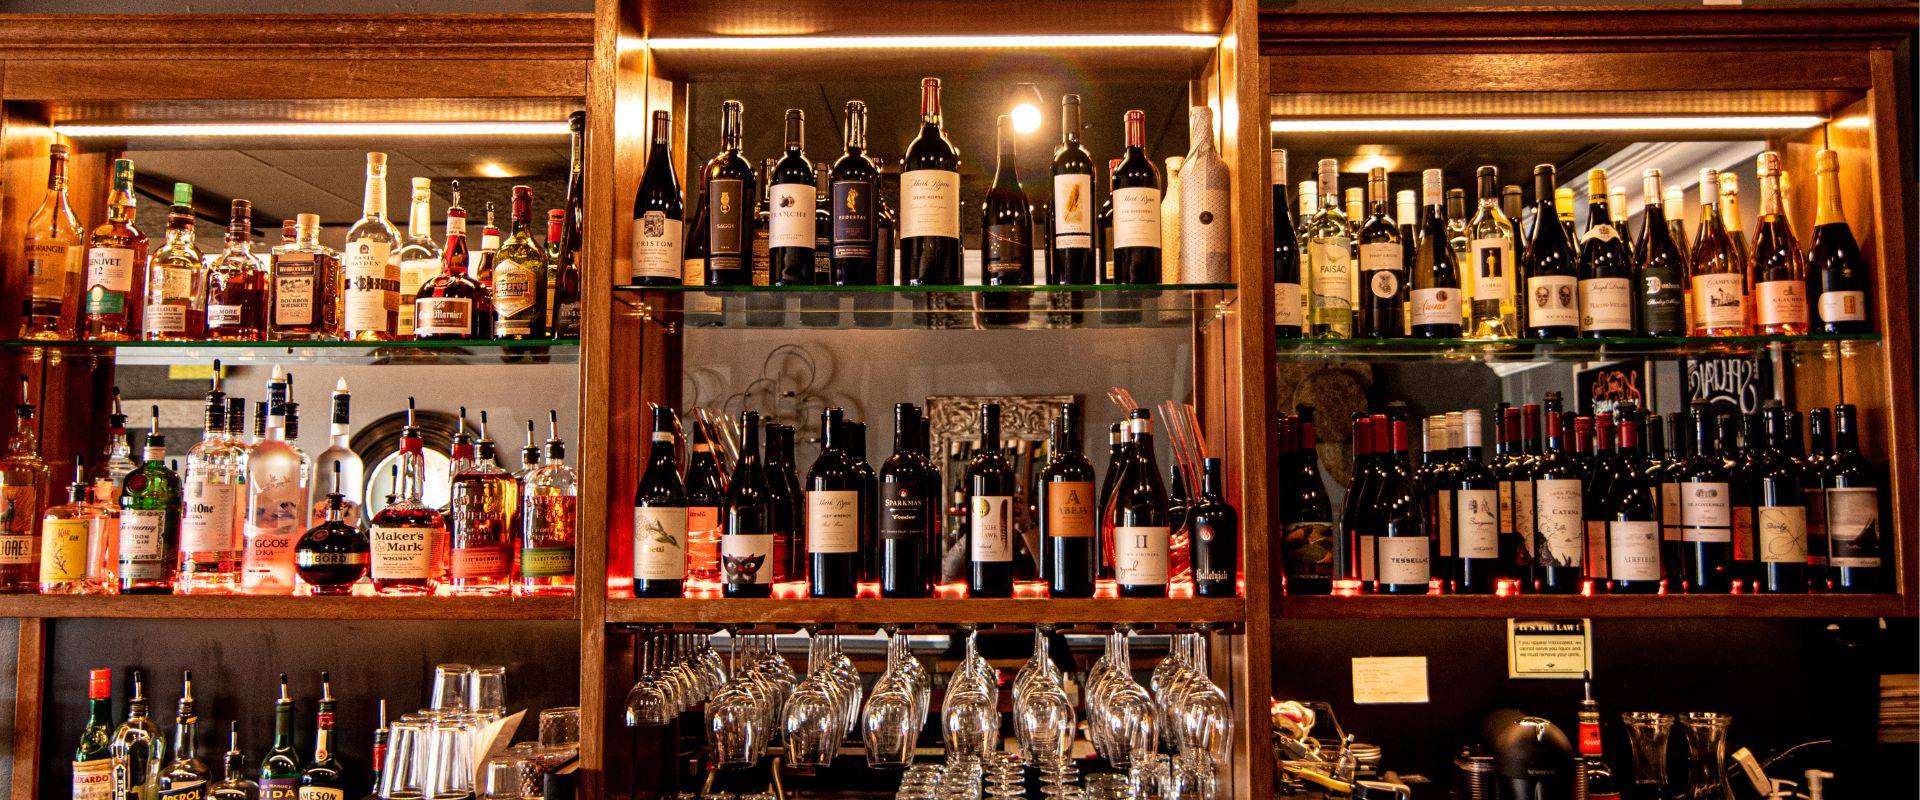 We proudly serve Washington wines and beers, craft cocktails, and mocktails. We also have a full bar.